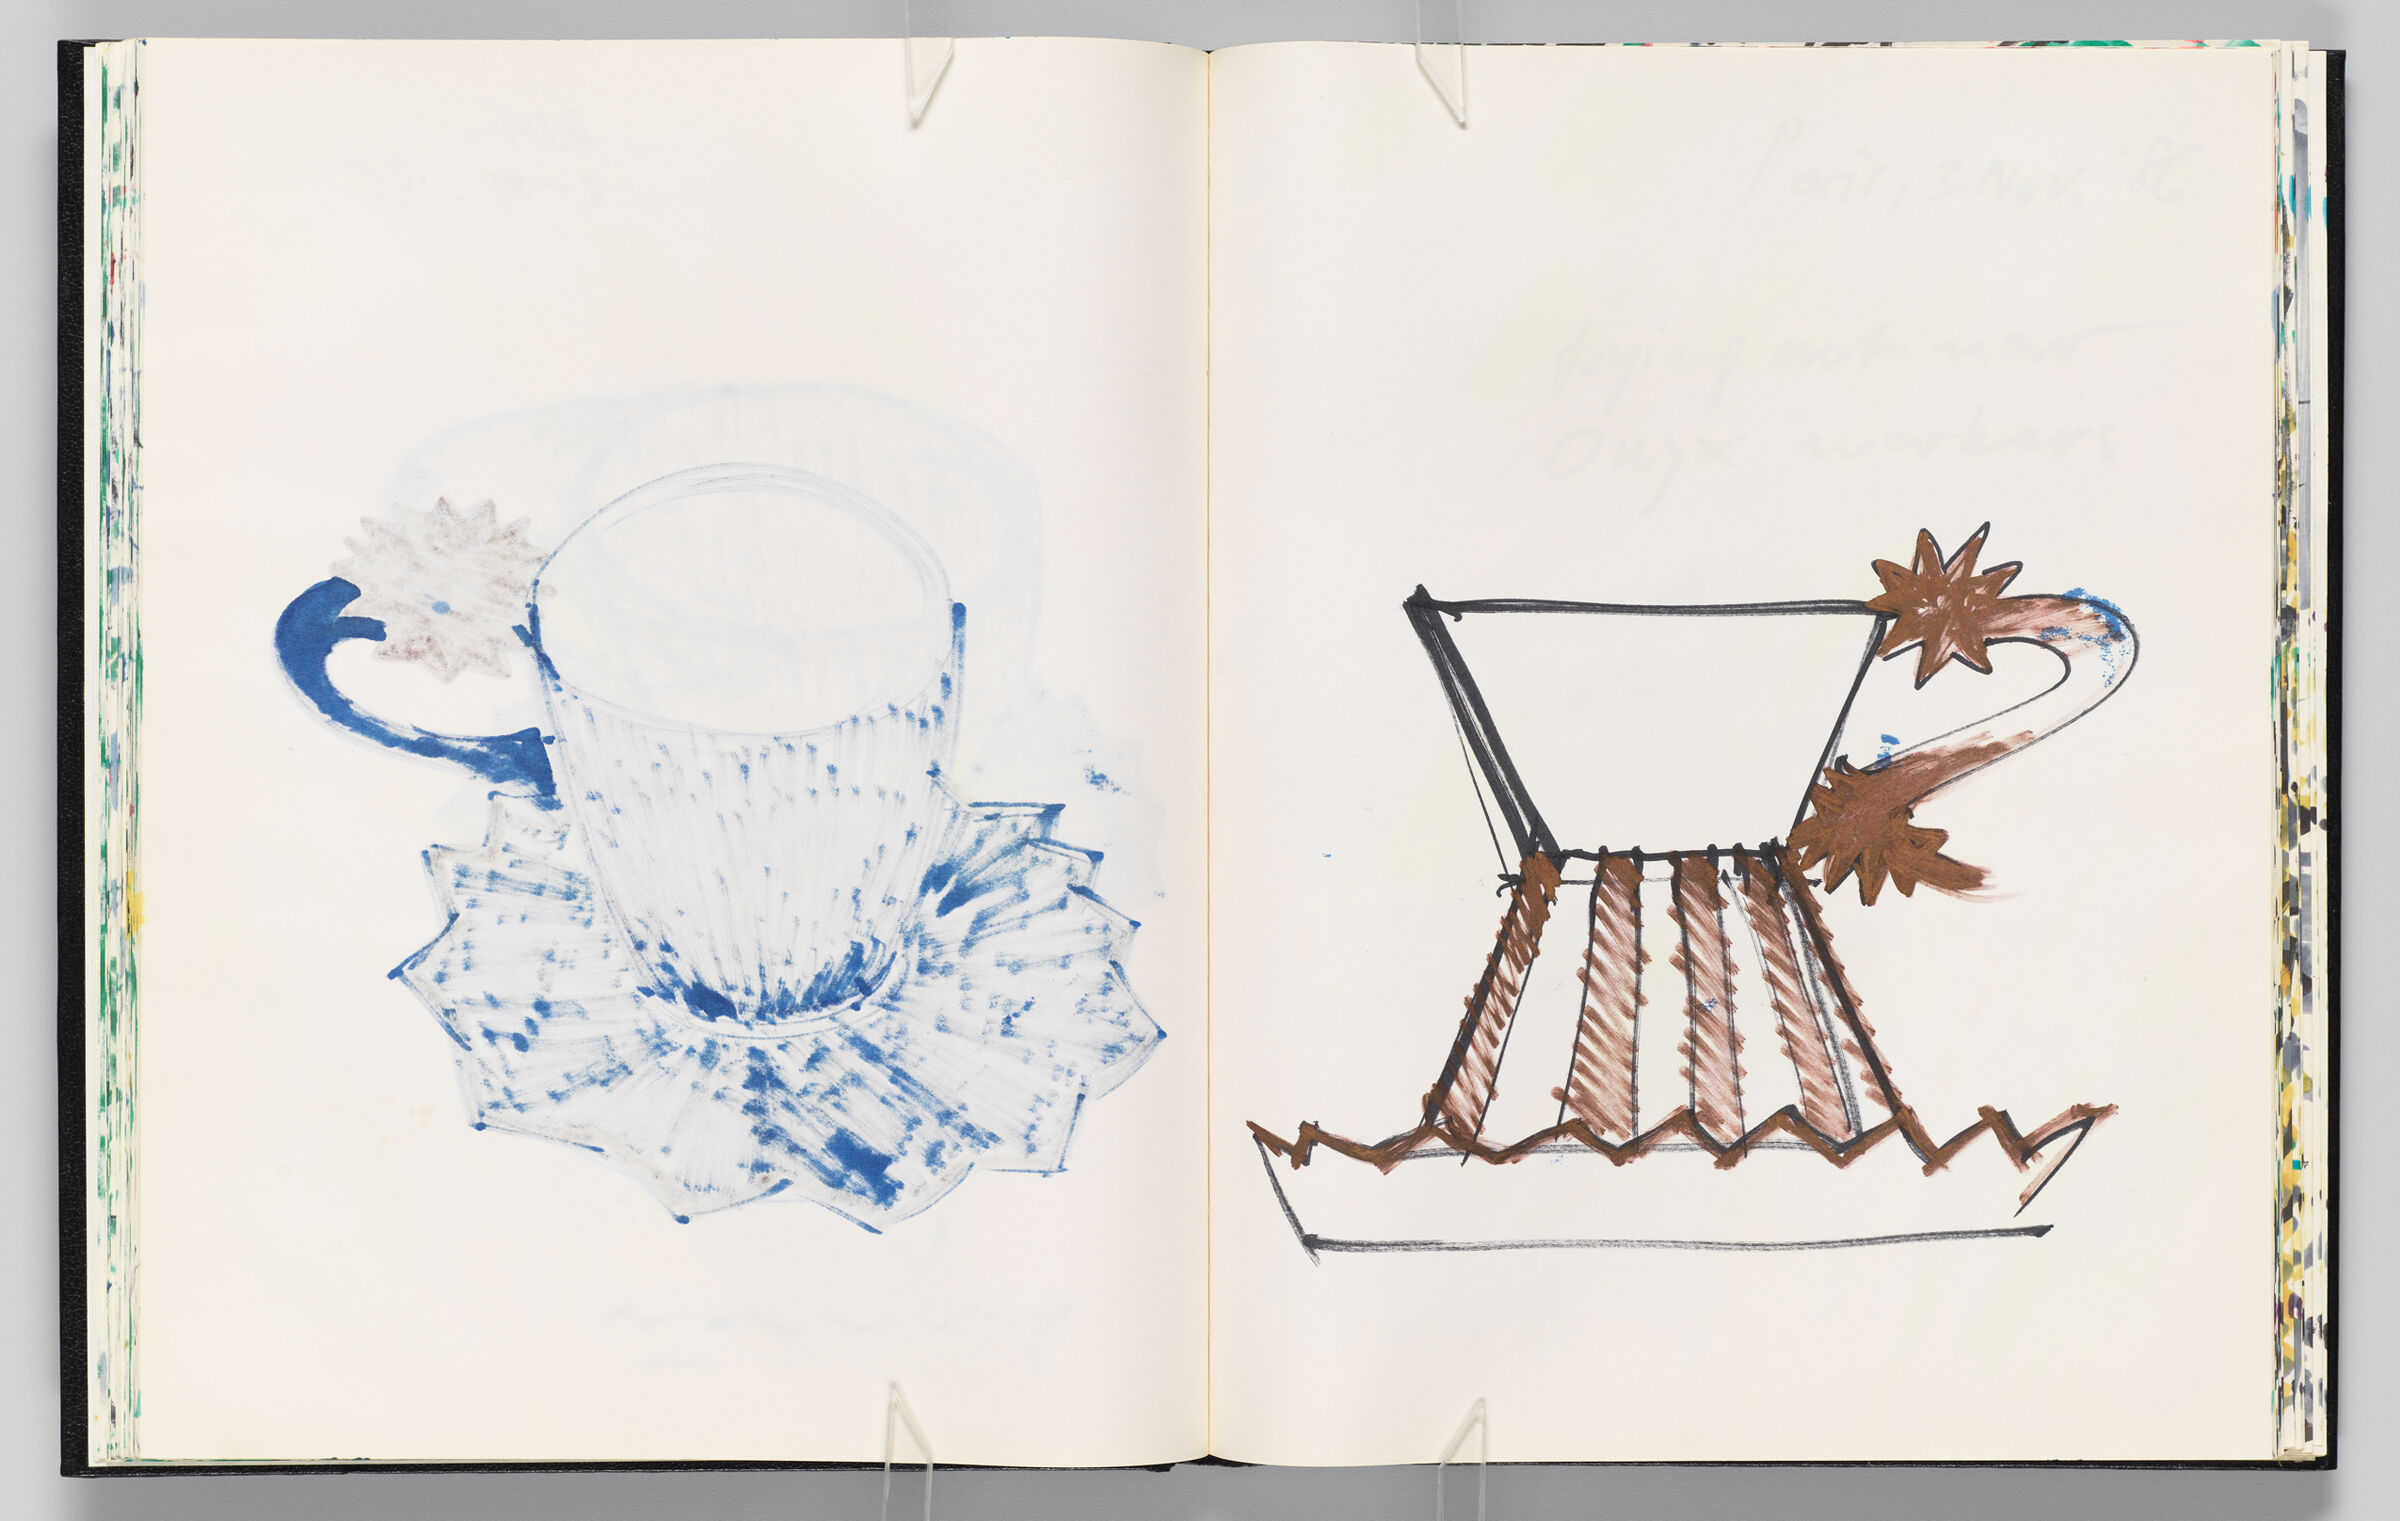 Untitled (Bleed-Through Of Previous Page, Left Page); Untitled (Rosenthal Cup Sketch, Right Page)